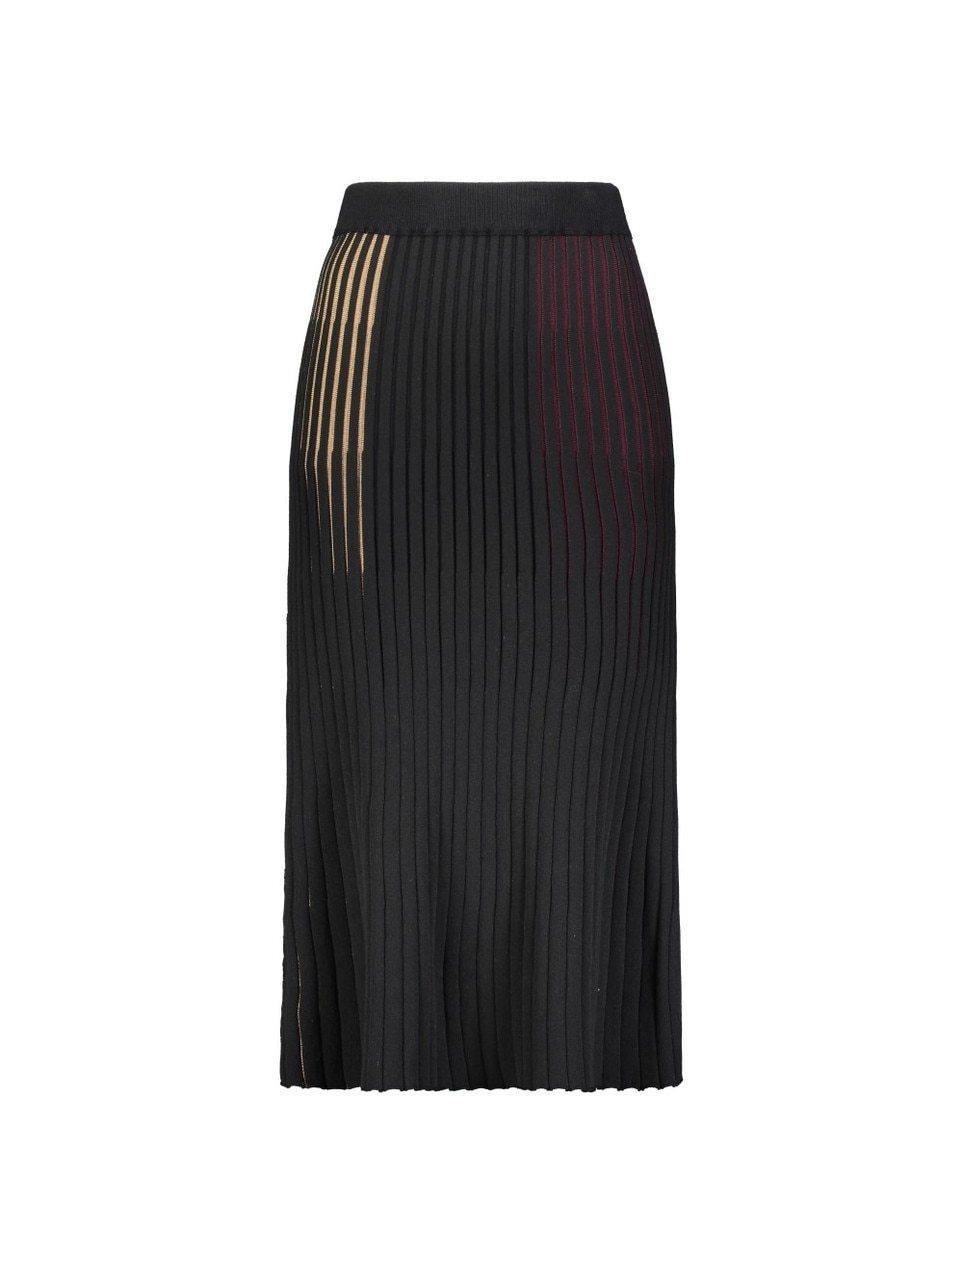 YAL Ribbed Knit Skirt vendor-unknown